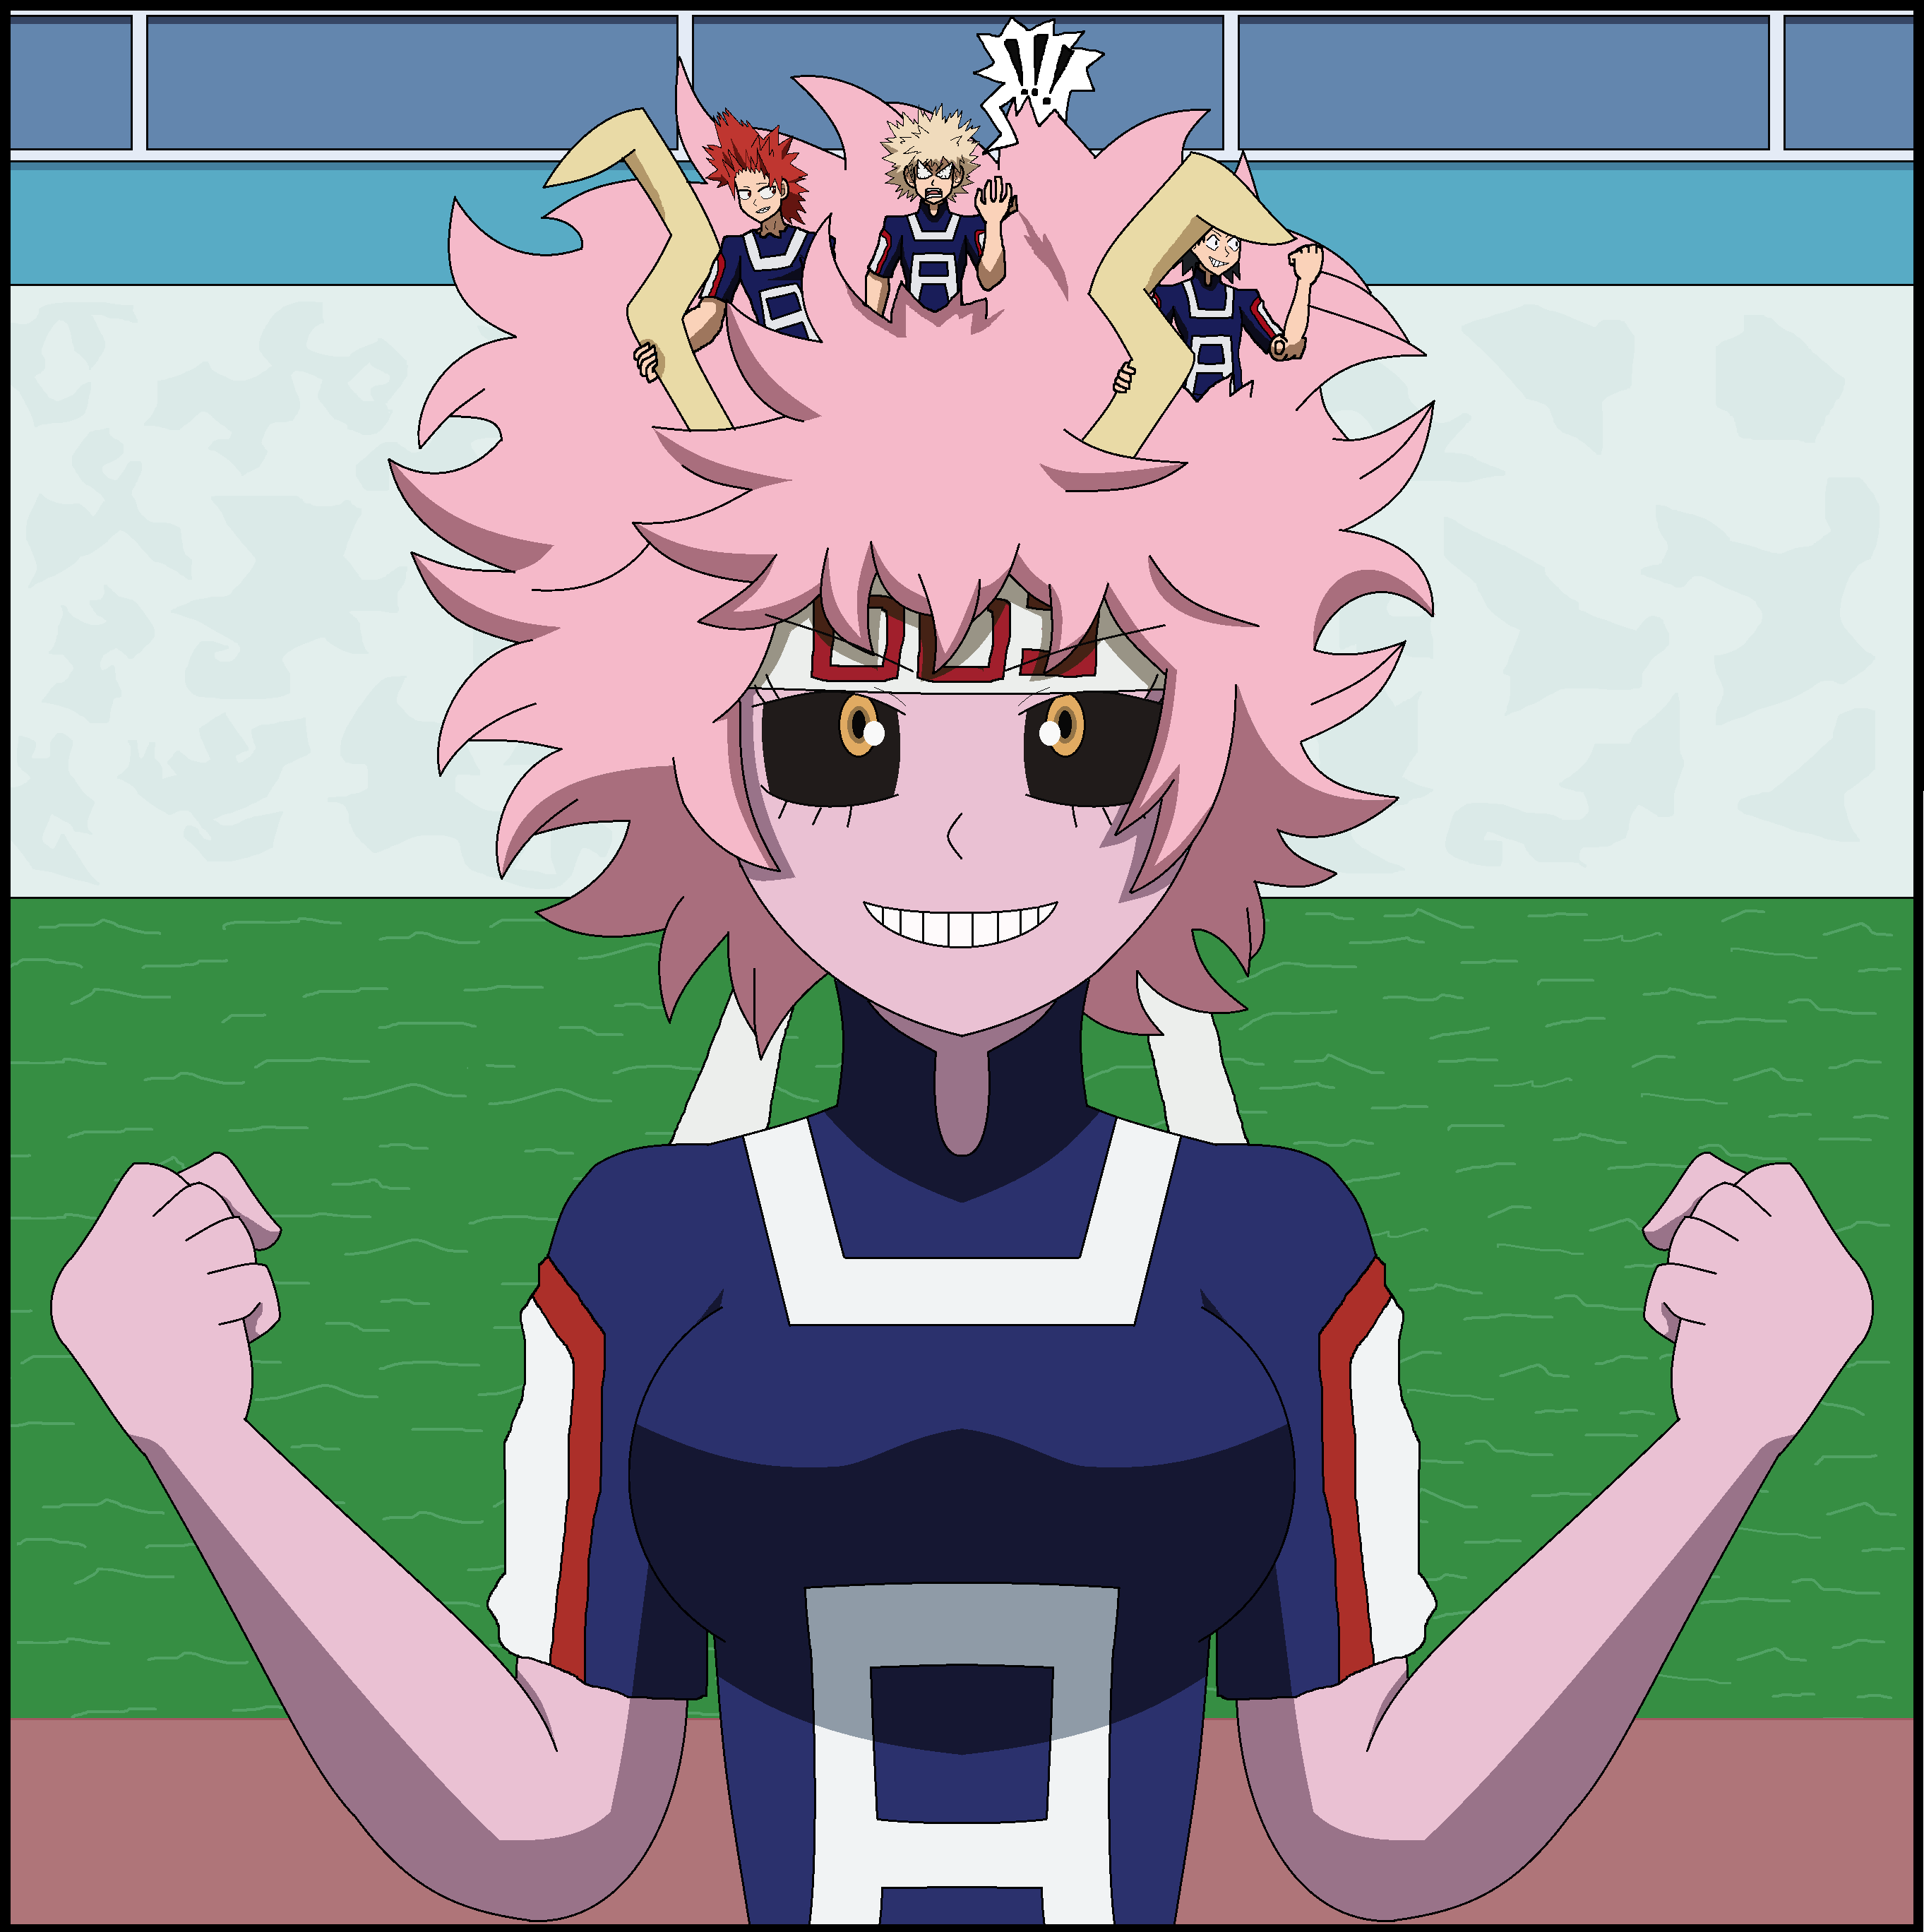 Team Ashido going for it.